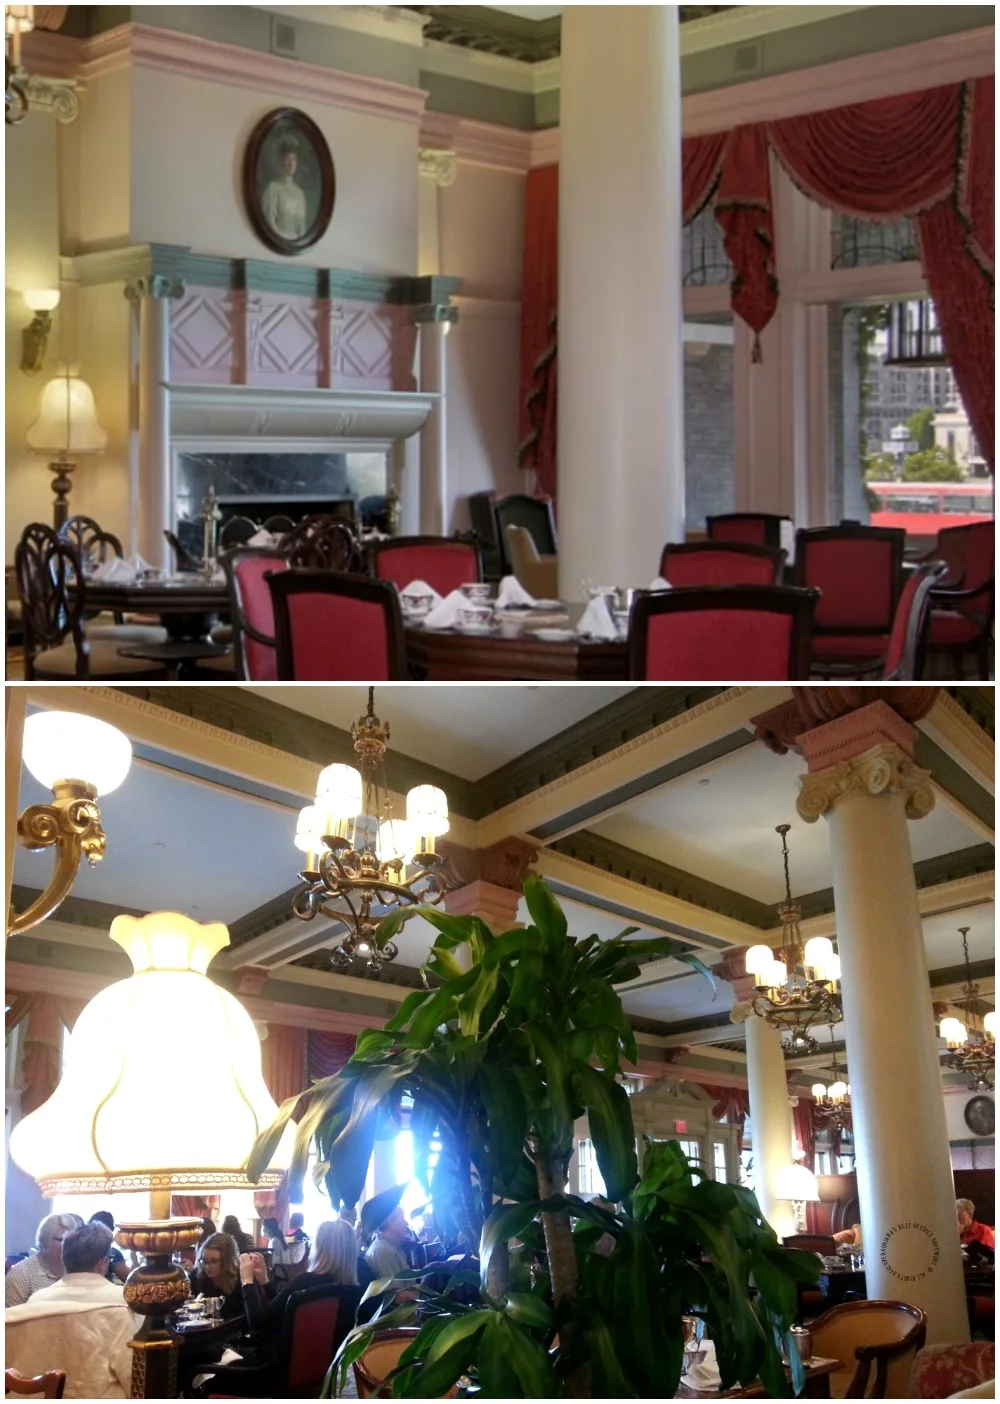 Waiting to be seated for tea time at the Fairmont Empress